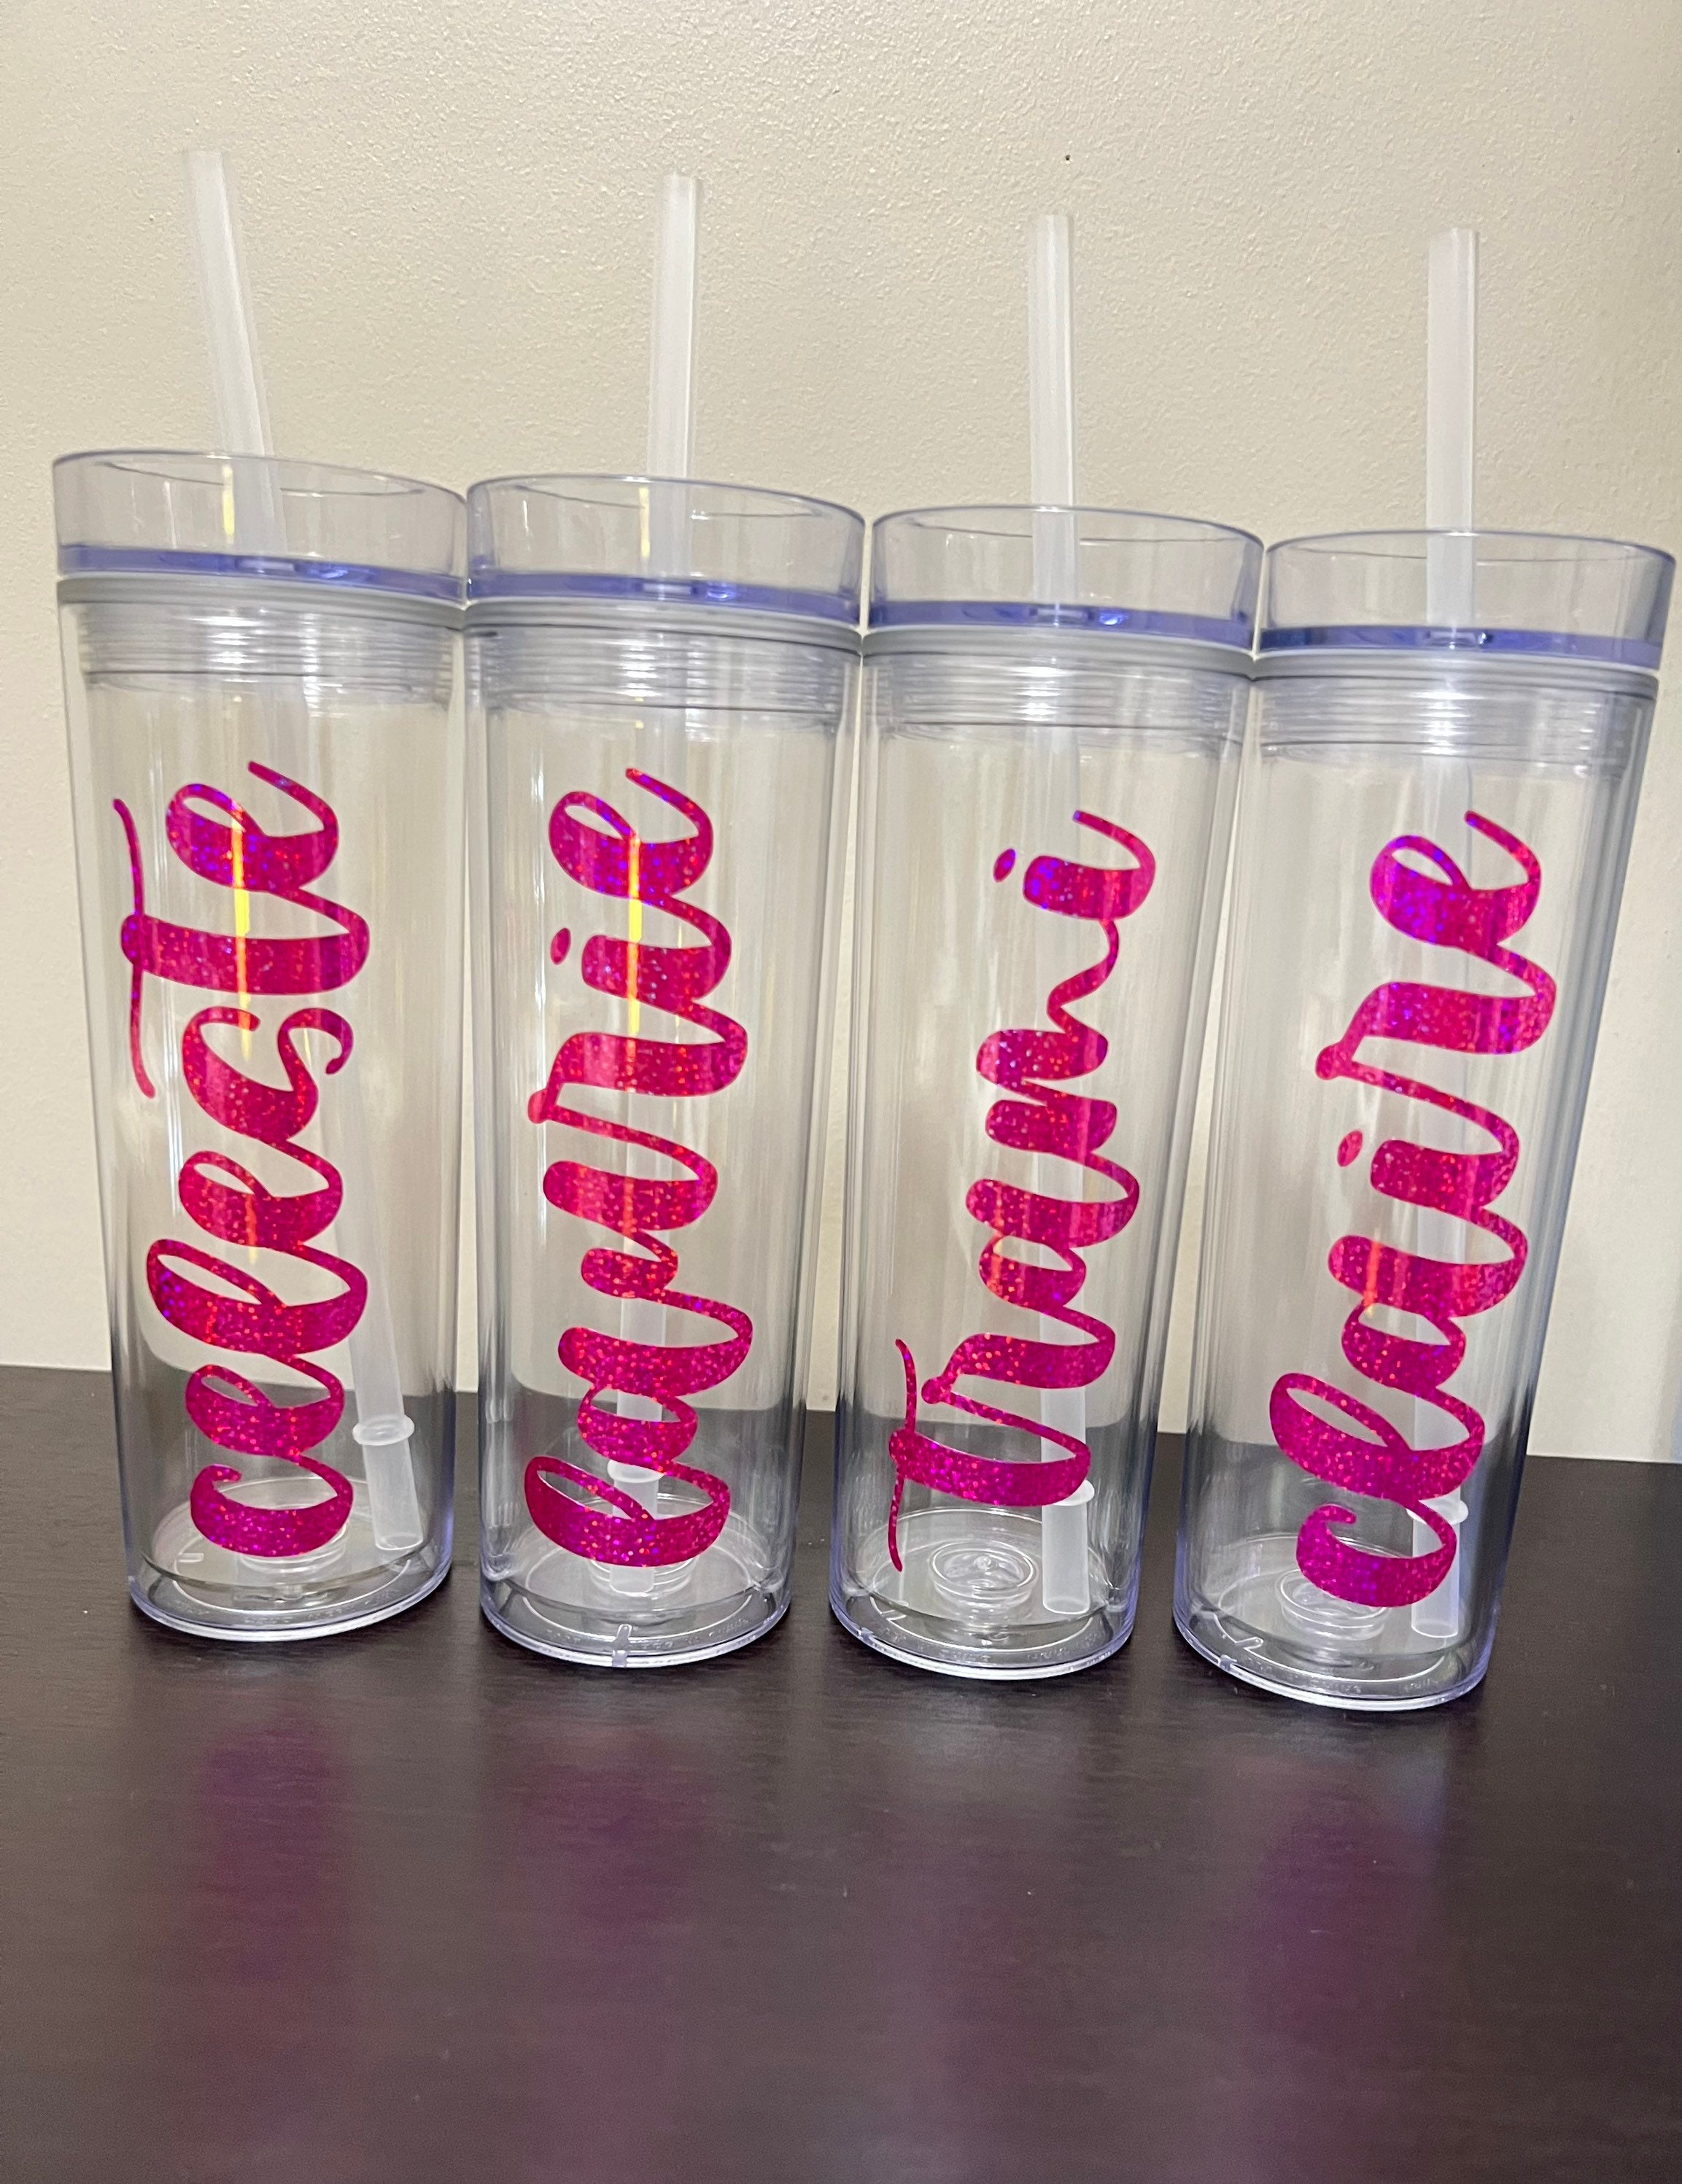 Acrylic Skinny Sublimation Tumblers With Lids And Straws Skinny Tumbler  Clear Plastic Skinny Sublimation Tumblers 16oz Travel Cups Water Cup  Reusable Cup With Straw From Hc_network, $1.91